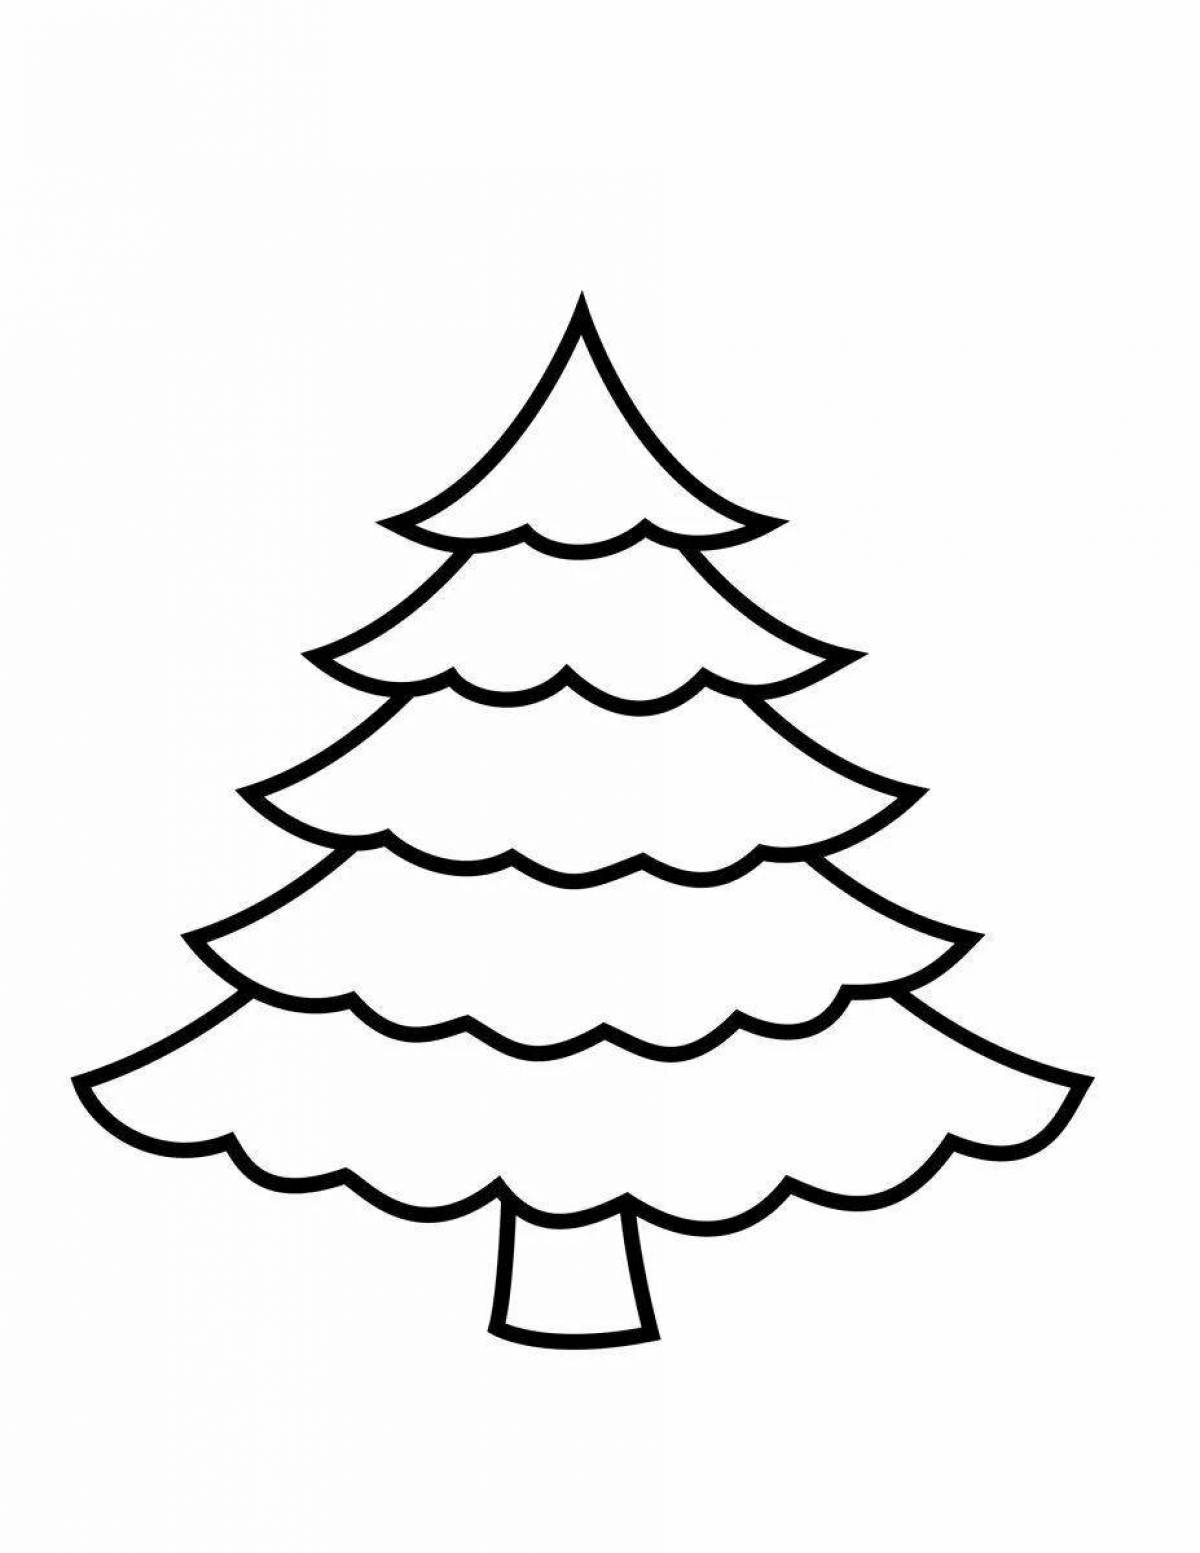 Coloring bright Christmas tree for children